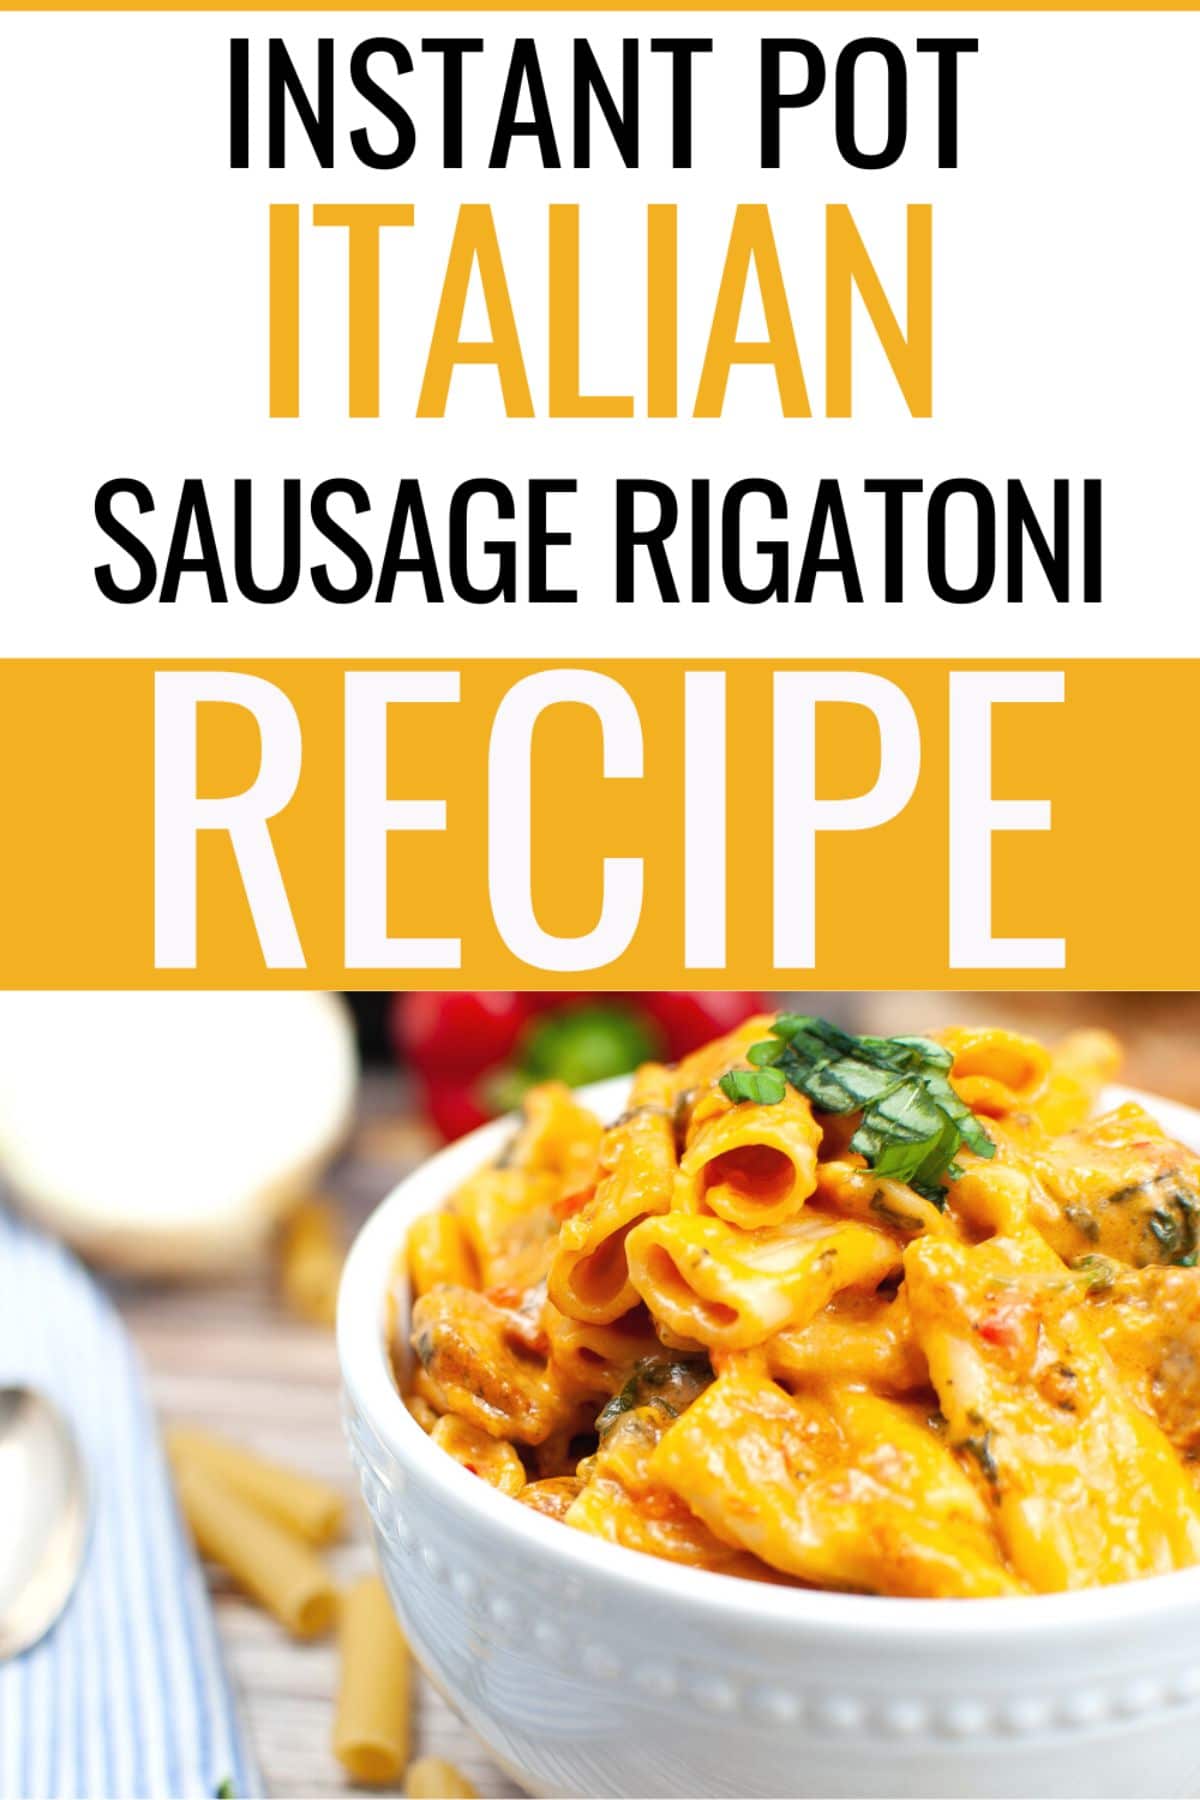 An image of a serving of Instant Pot Italian Sausage Rigatoni in a white bowl with a text at the upper half of the image saying Instant Pot Italian Sausage Rigatoni Recipe.